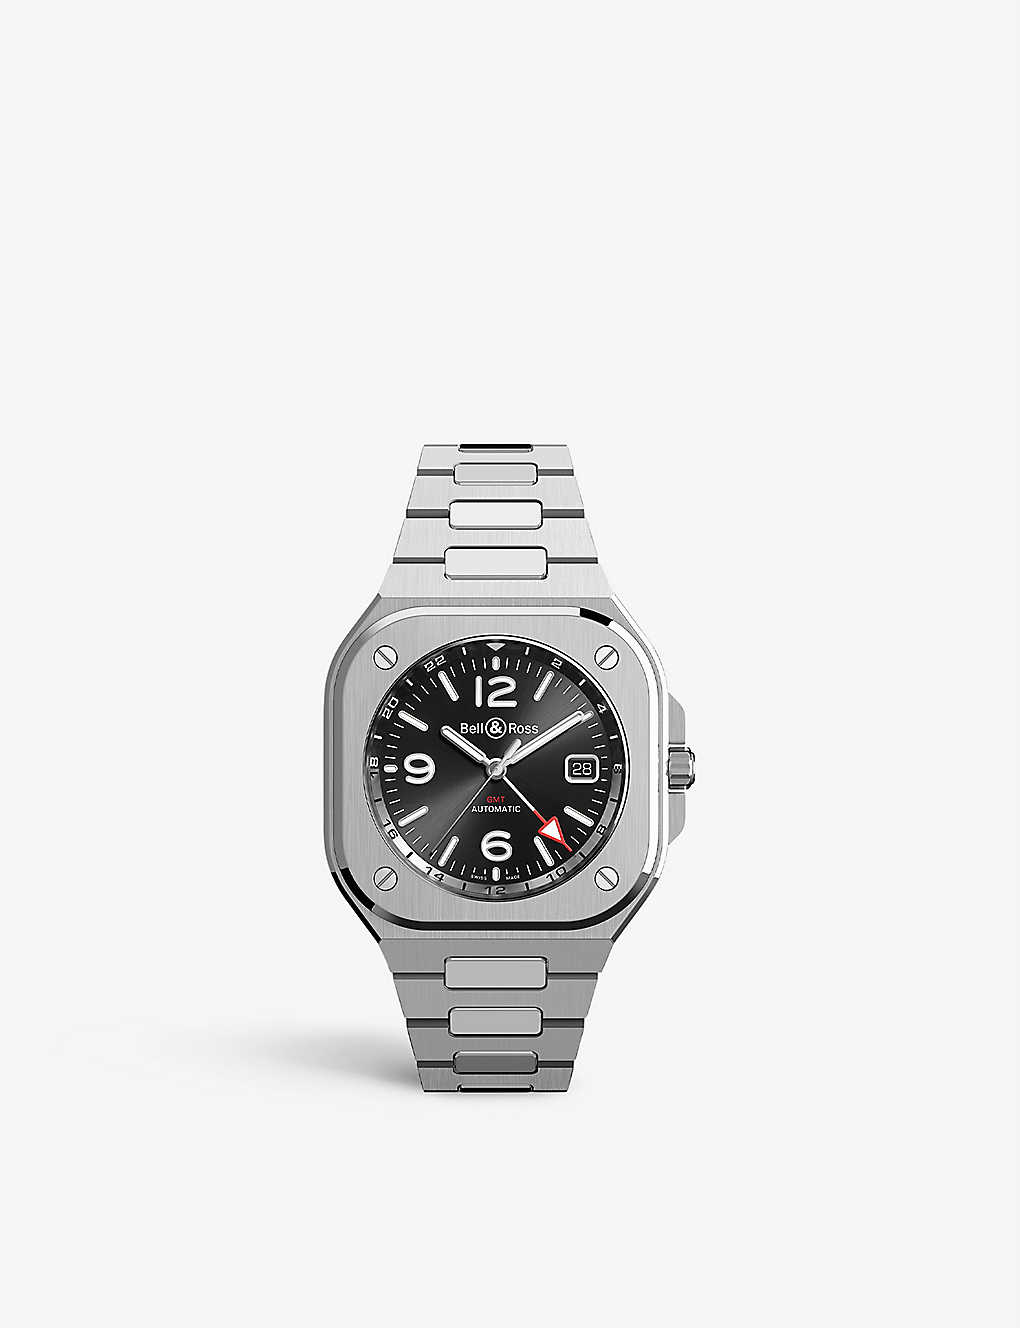 Bell & Ross Men's Silver Br05g-bl-st/sst Stainless-steel Automatic Watch